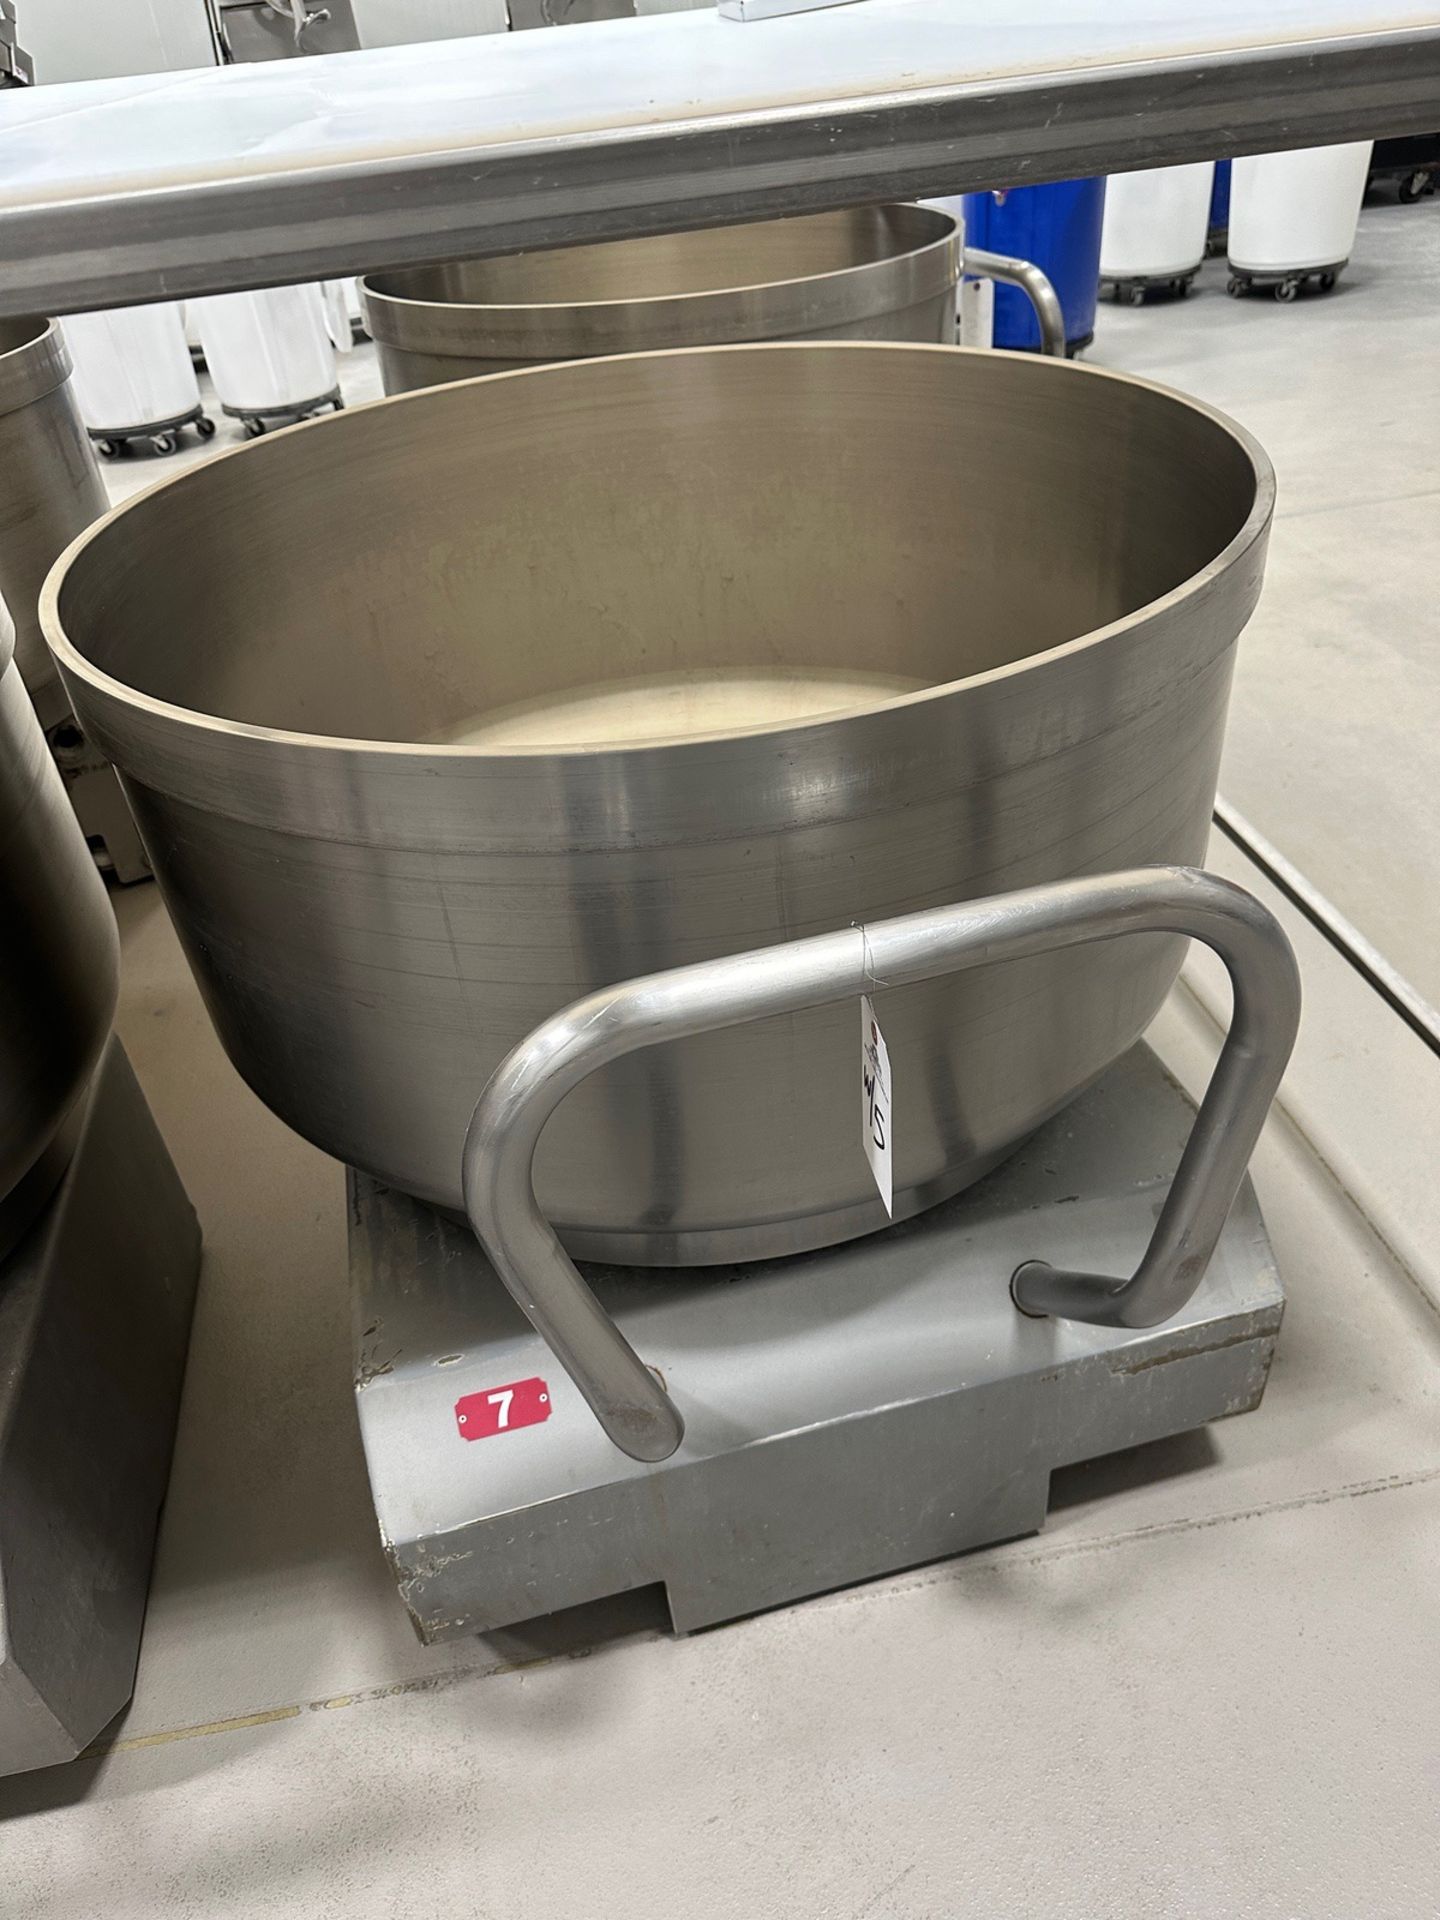 2021 Gemini Model ME 250 GOLD G5 - 550 LB Capacity - Removable Bowl Mixer - S/N 216055 - Comes with - Image 5 of 6